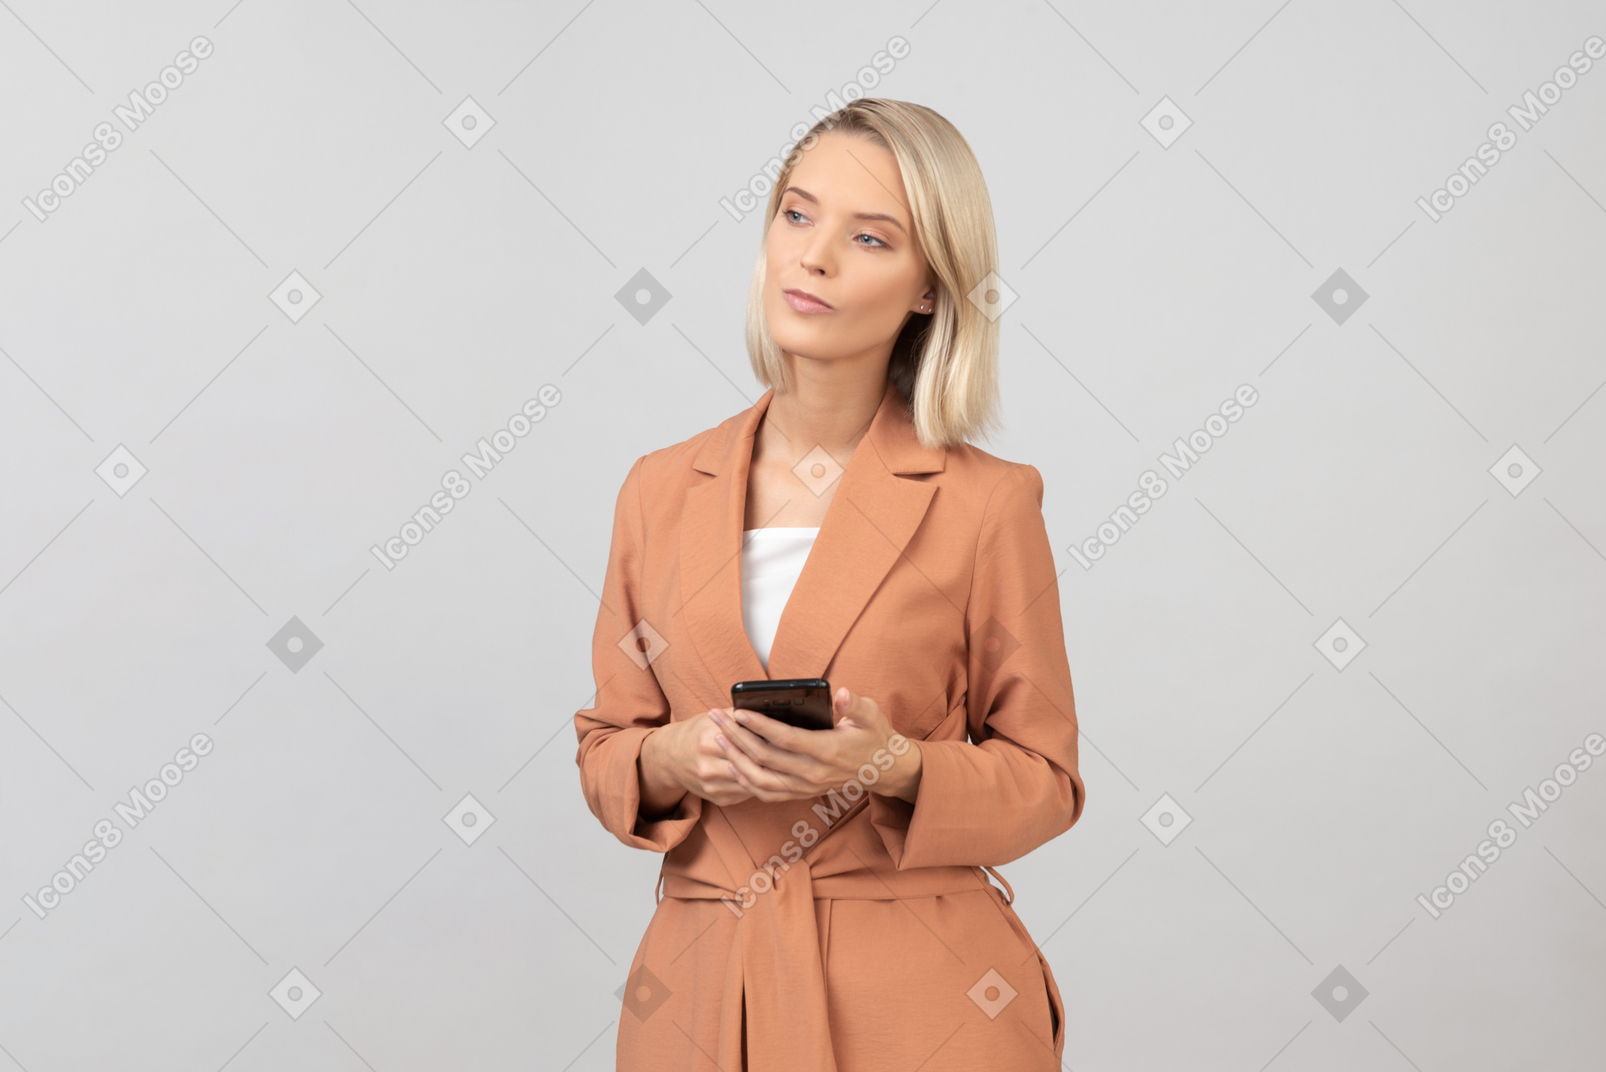 Contemplative young woman holding a smartphone